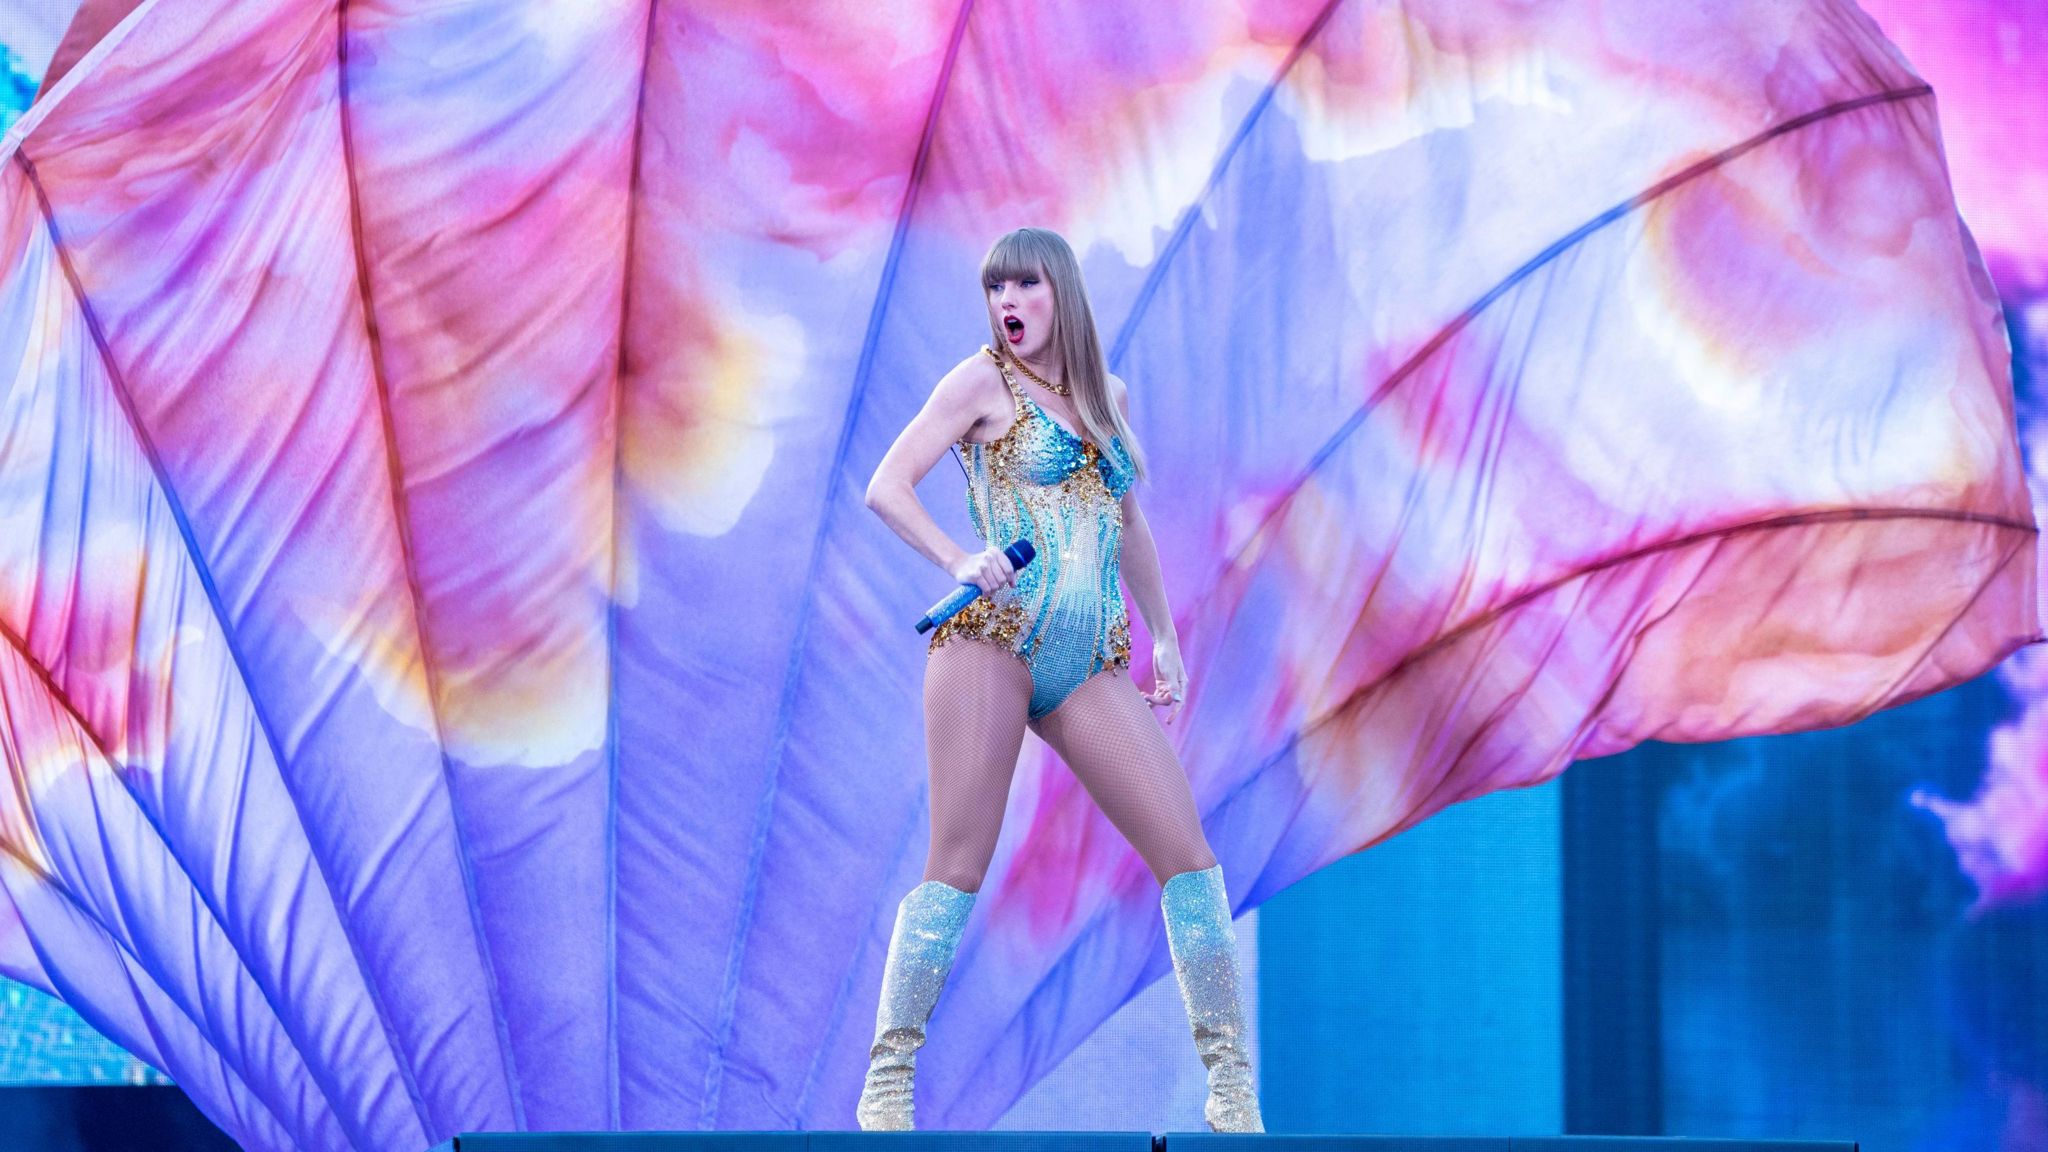 Taylor Swift on stage in Edinburgh at the Eras Tour 